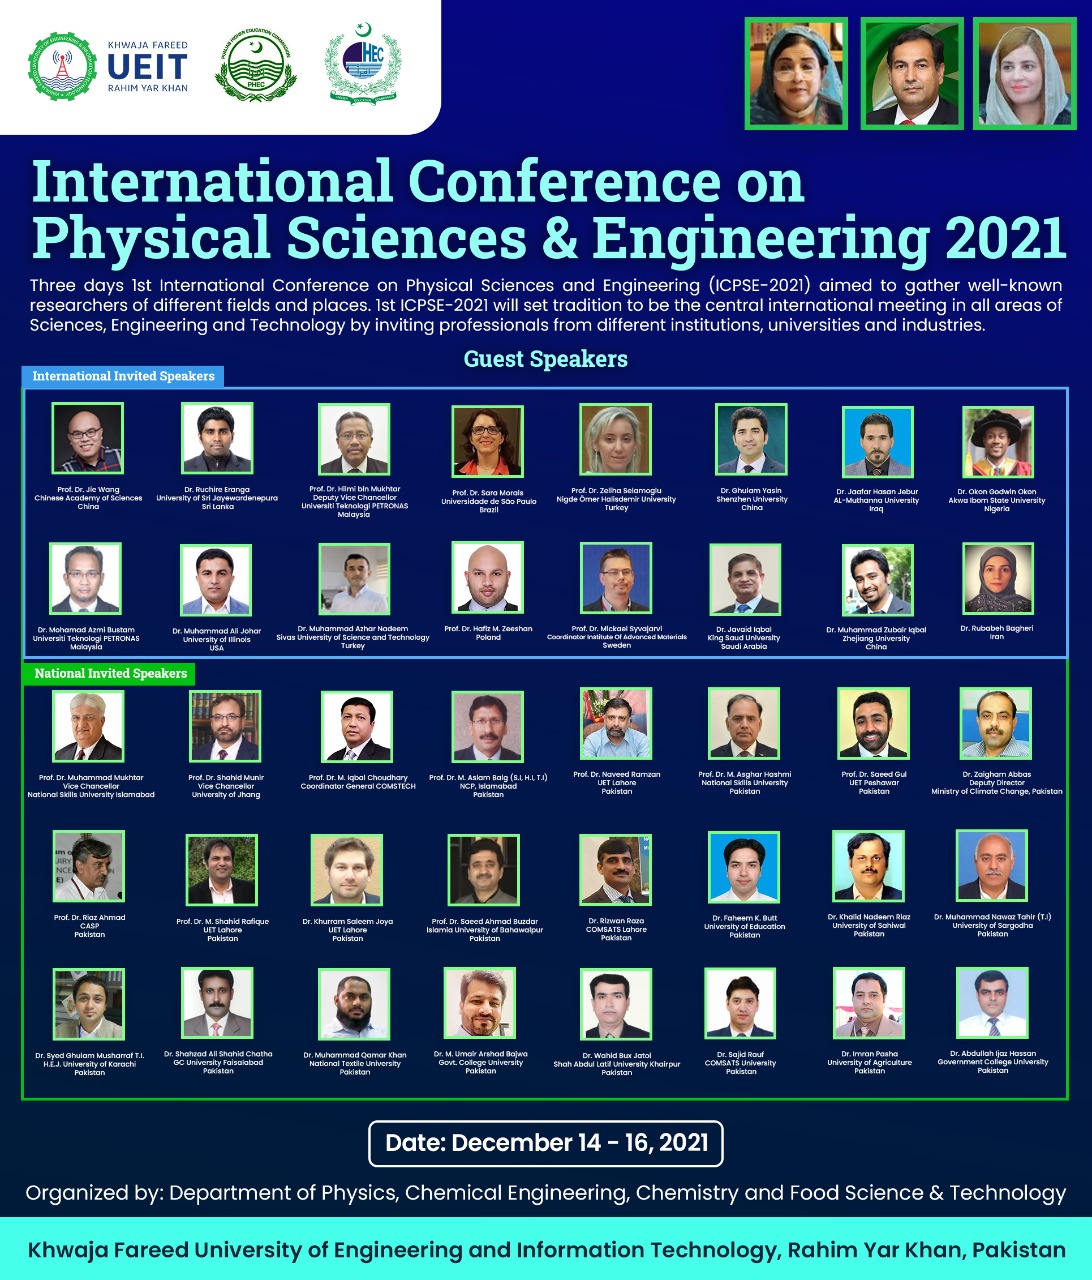 International Conference on Physical Sciences & Engineering 2021